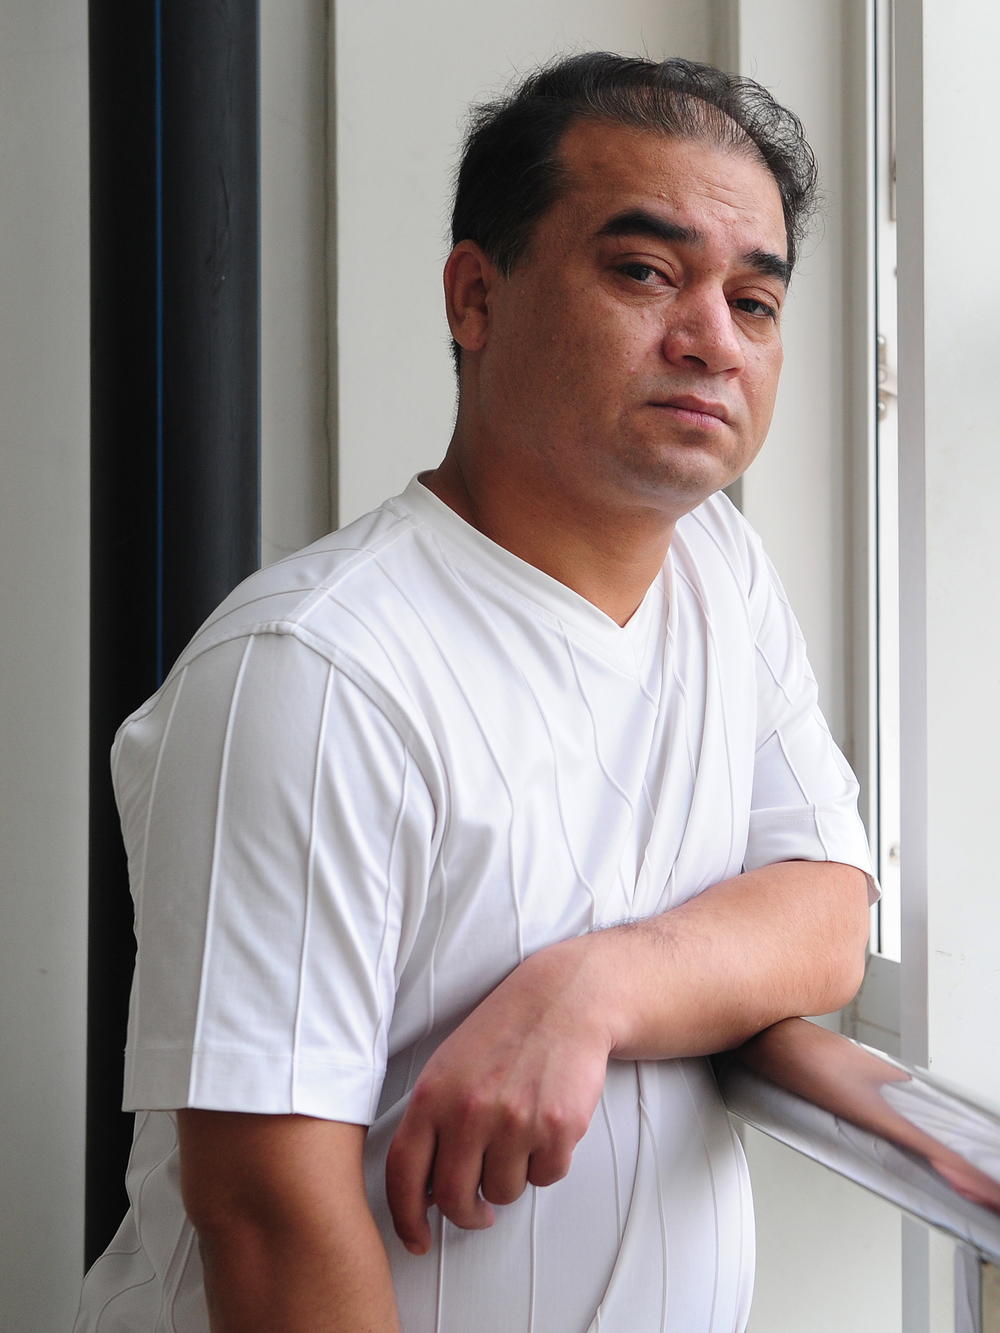 Ilham Tohti, university professor, blogger and activist, in Beijing on Jun 12, 2010. Tohti, an outspoken activist for Uyghur rights, was sentenced to life imprisonment in China for 